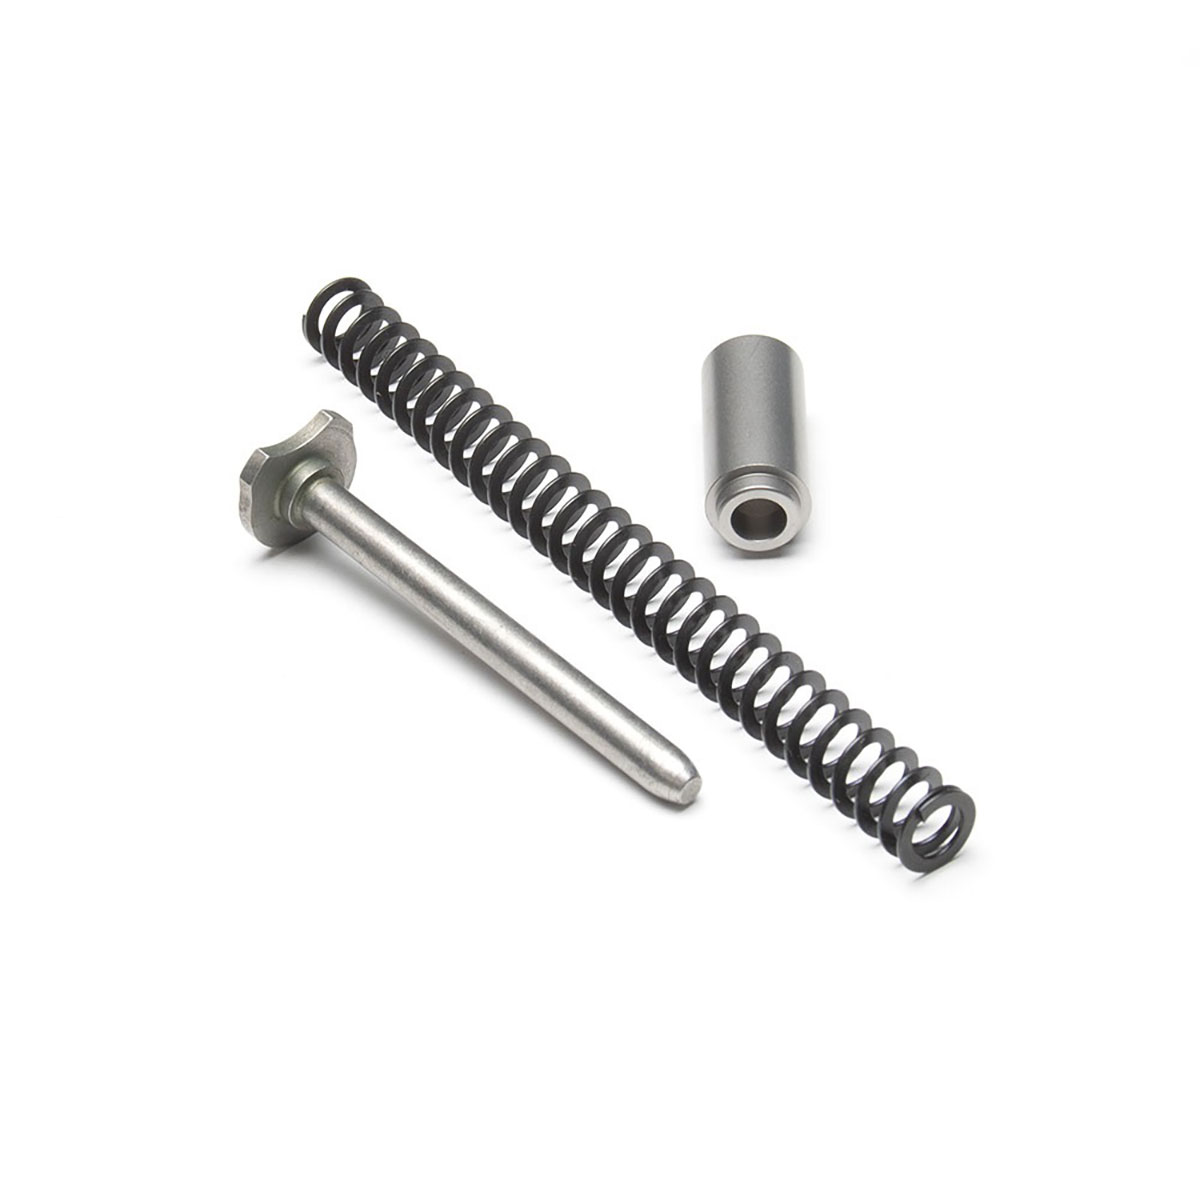 ED BROWN - 1911 9MM LUGER FLAT WIRE RECOIL SPRING SYSTEM